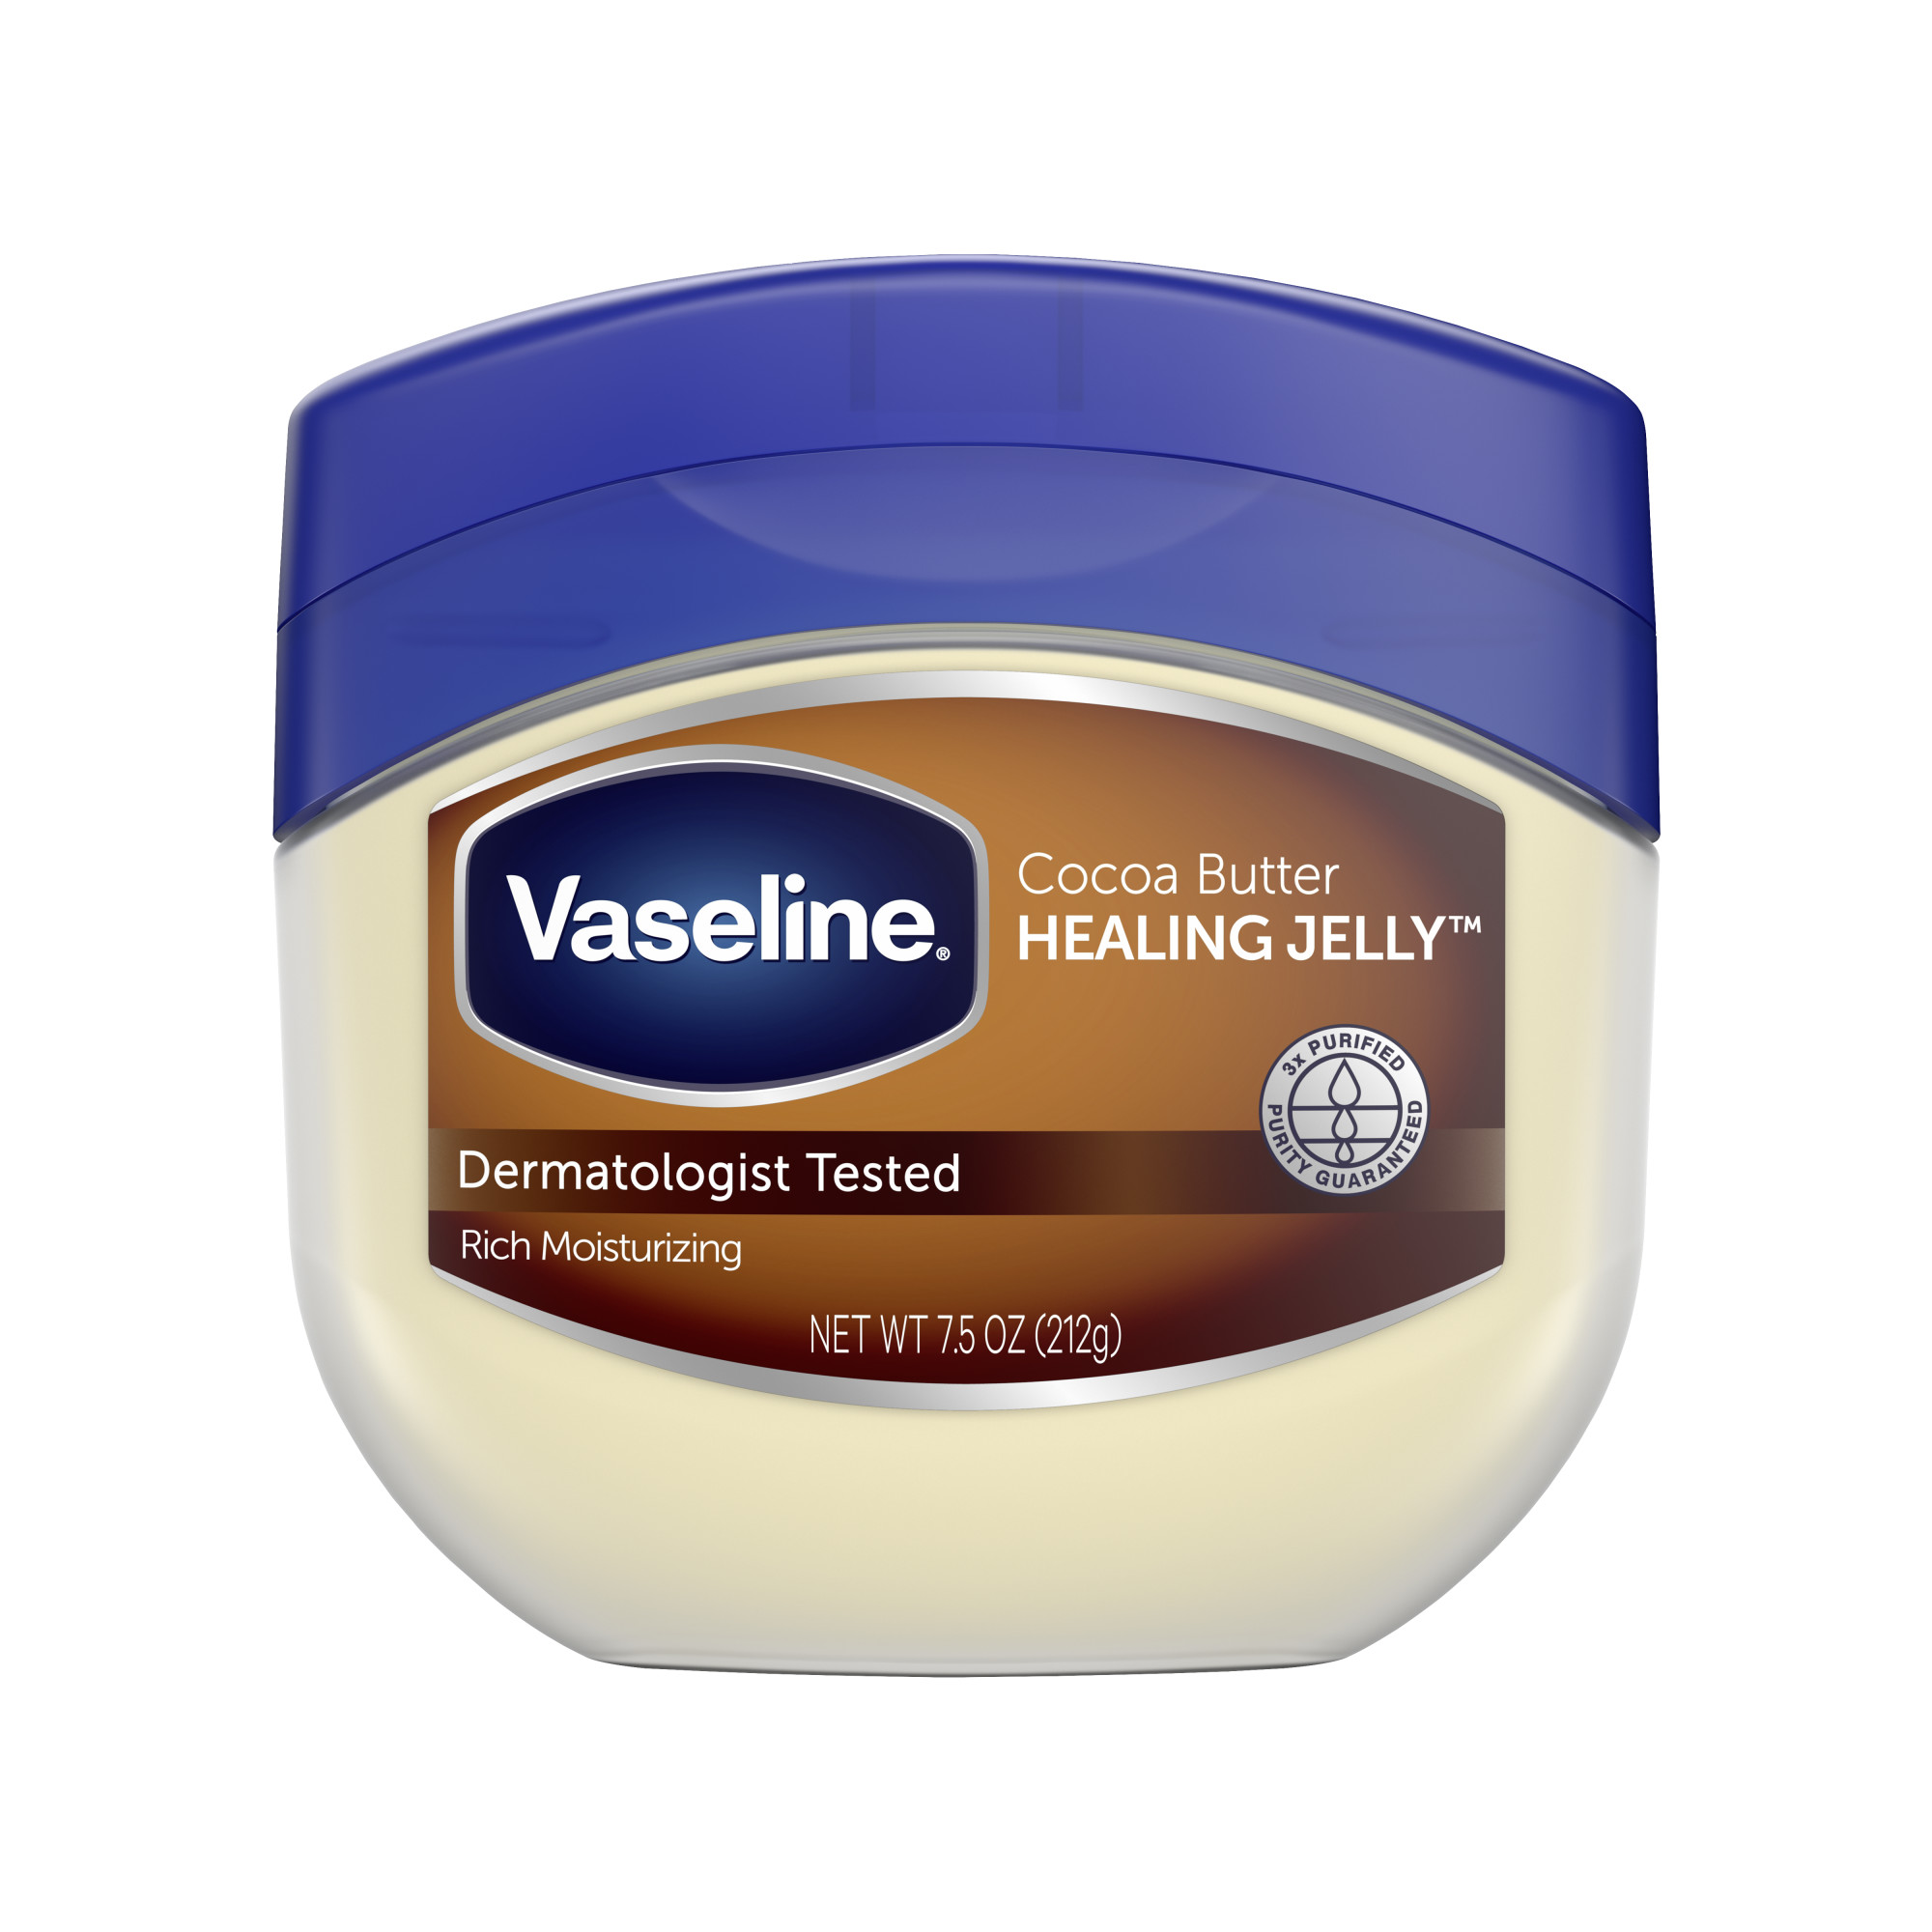 Vaseline Lock In Moisture Cocoa Butter Healing Petroleum Jelly for Dry Skin, 7.5 oz - image 1 of 5